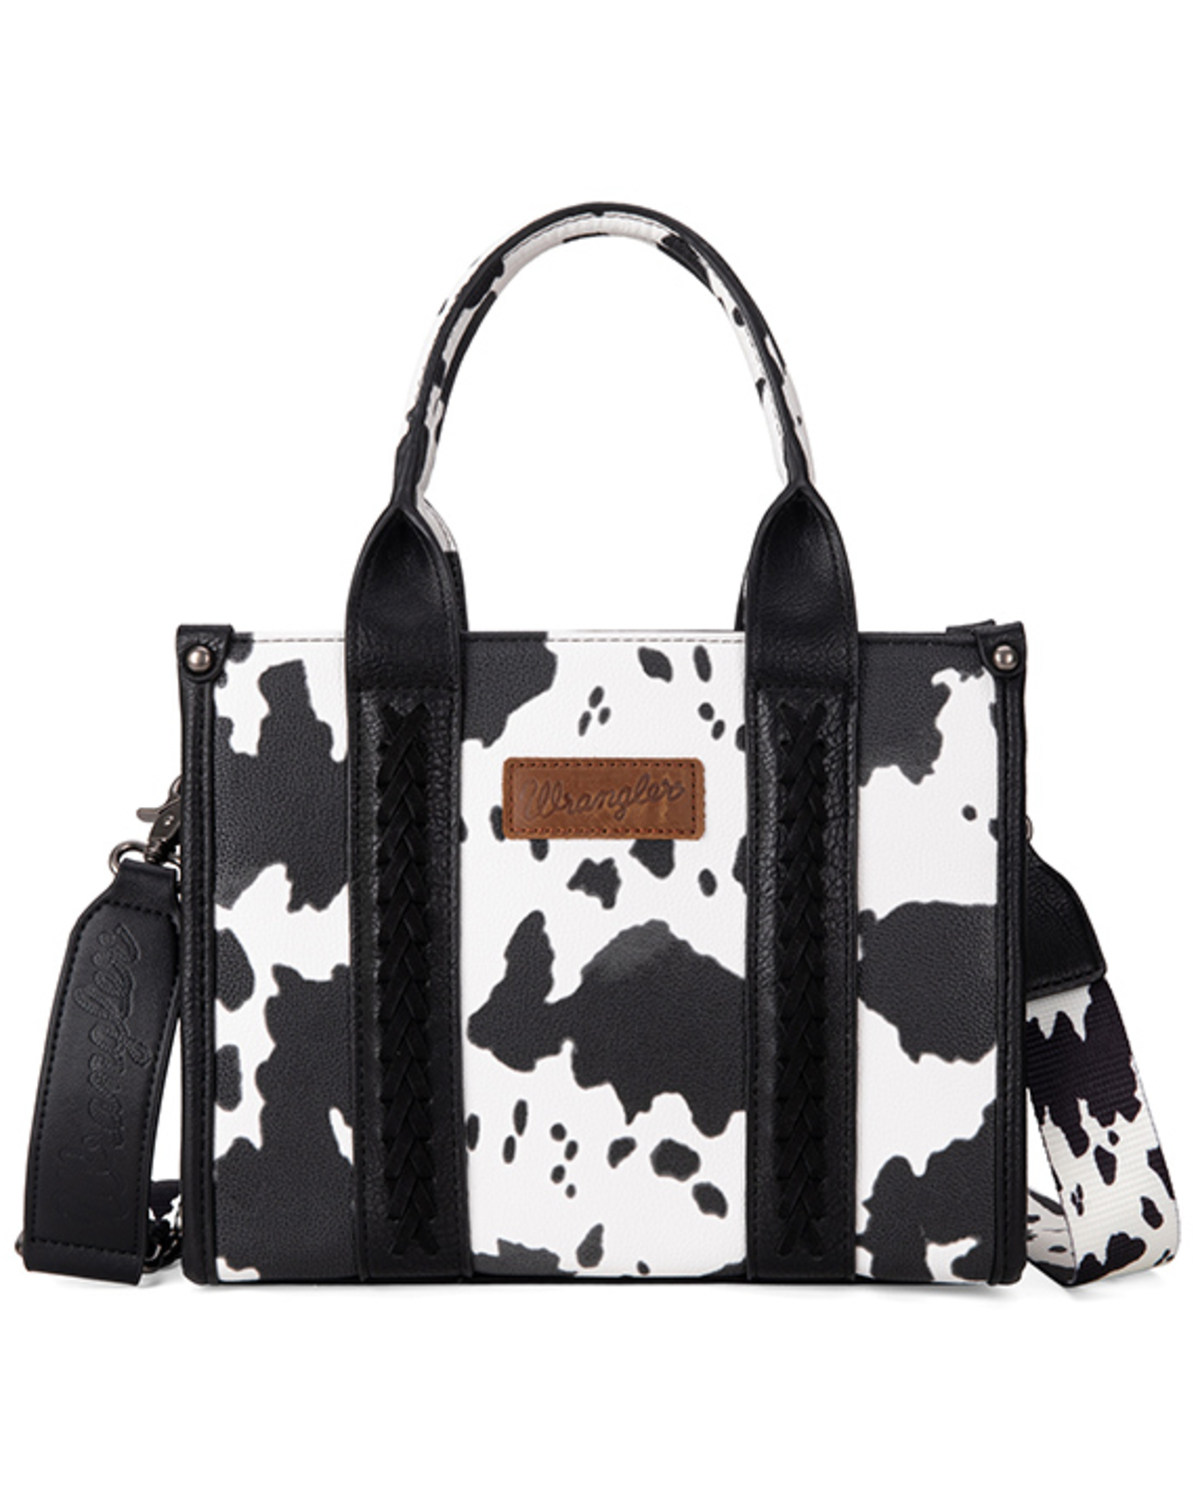 Wrangler Women's Cow Print Concealed Carry Crossbody Tote